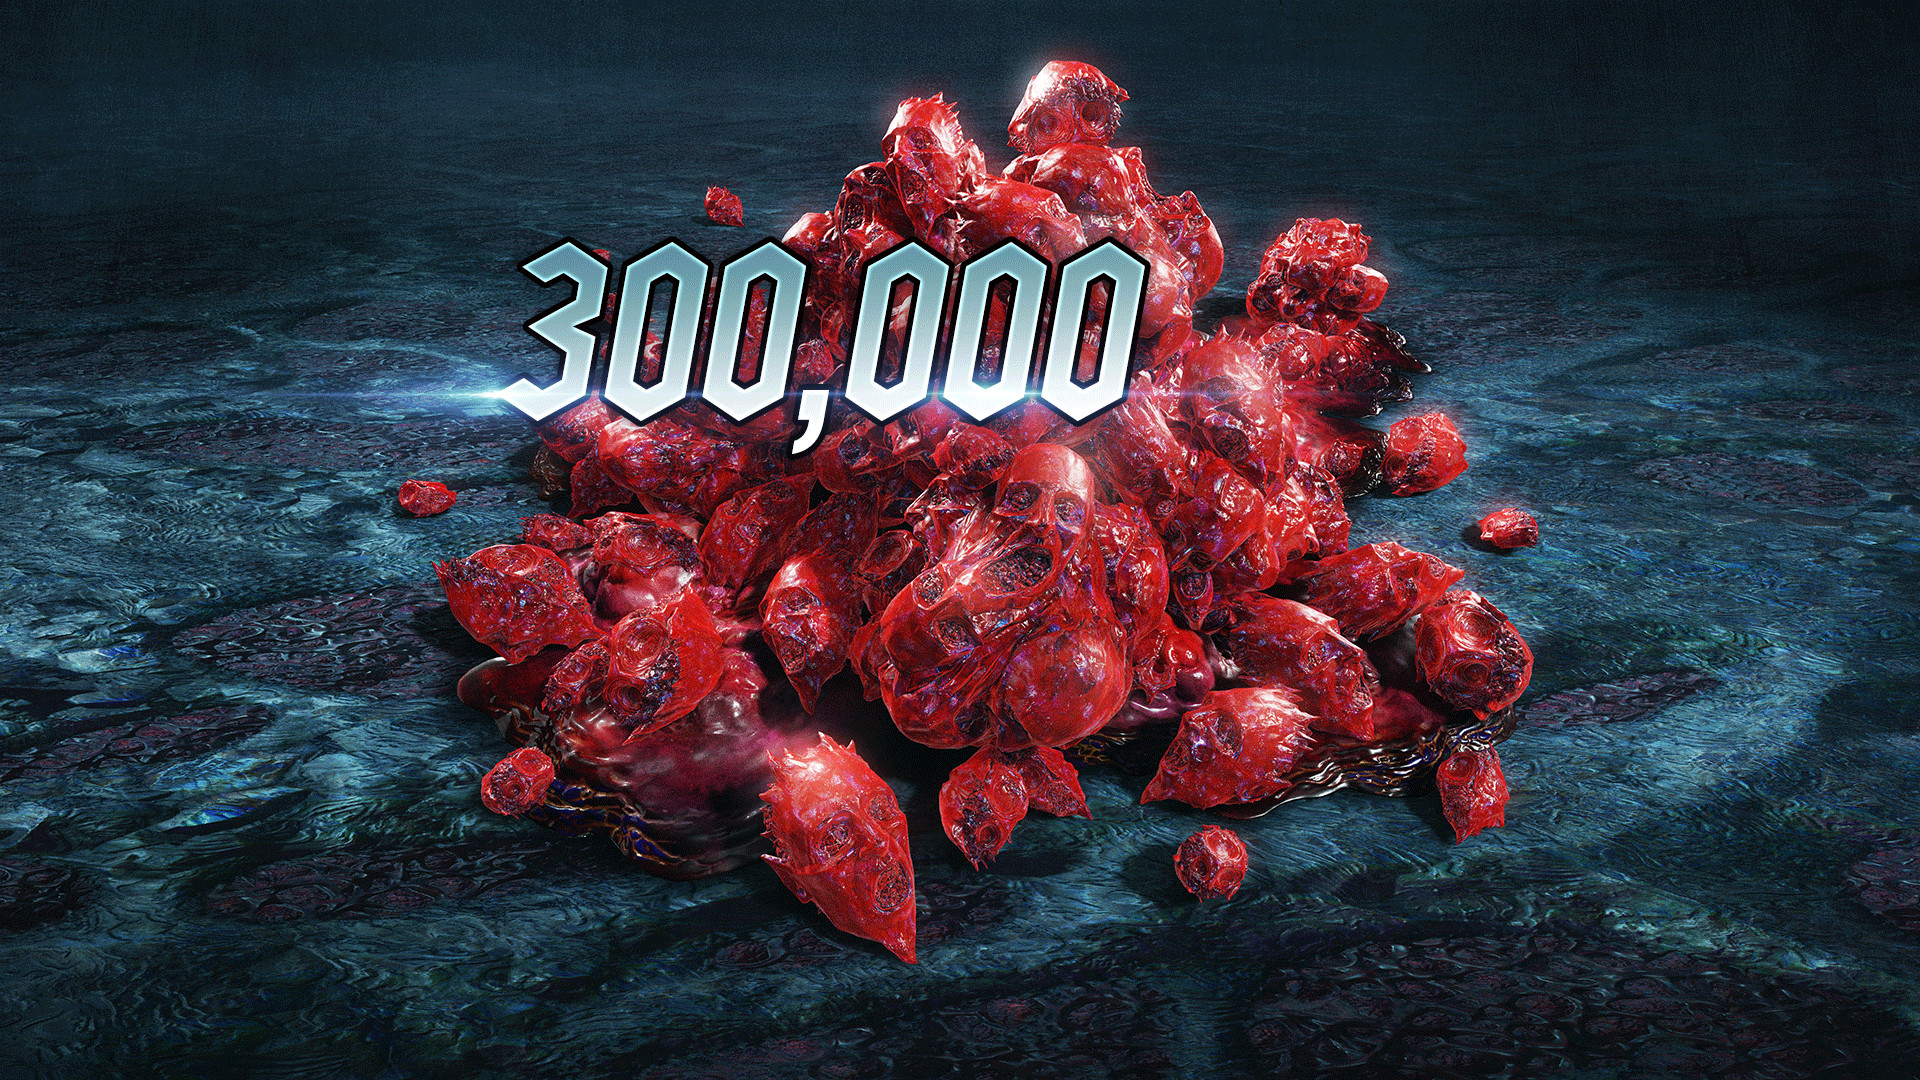 Devil May Cry 5 - 300000 Red Orbs Featured Screenshot #1